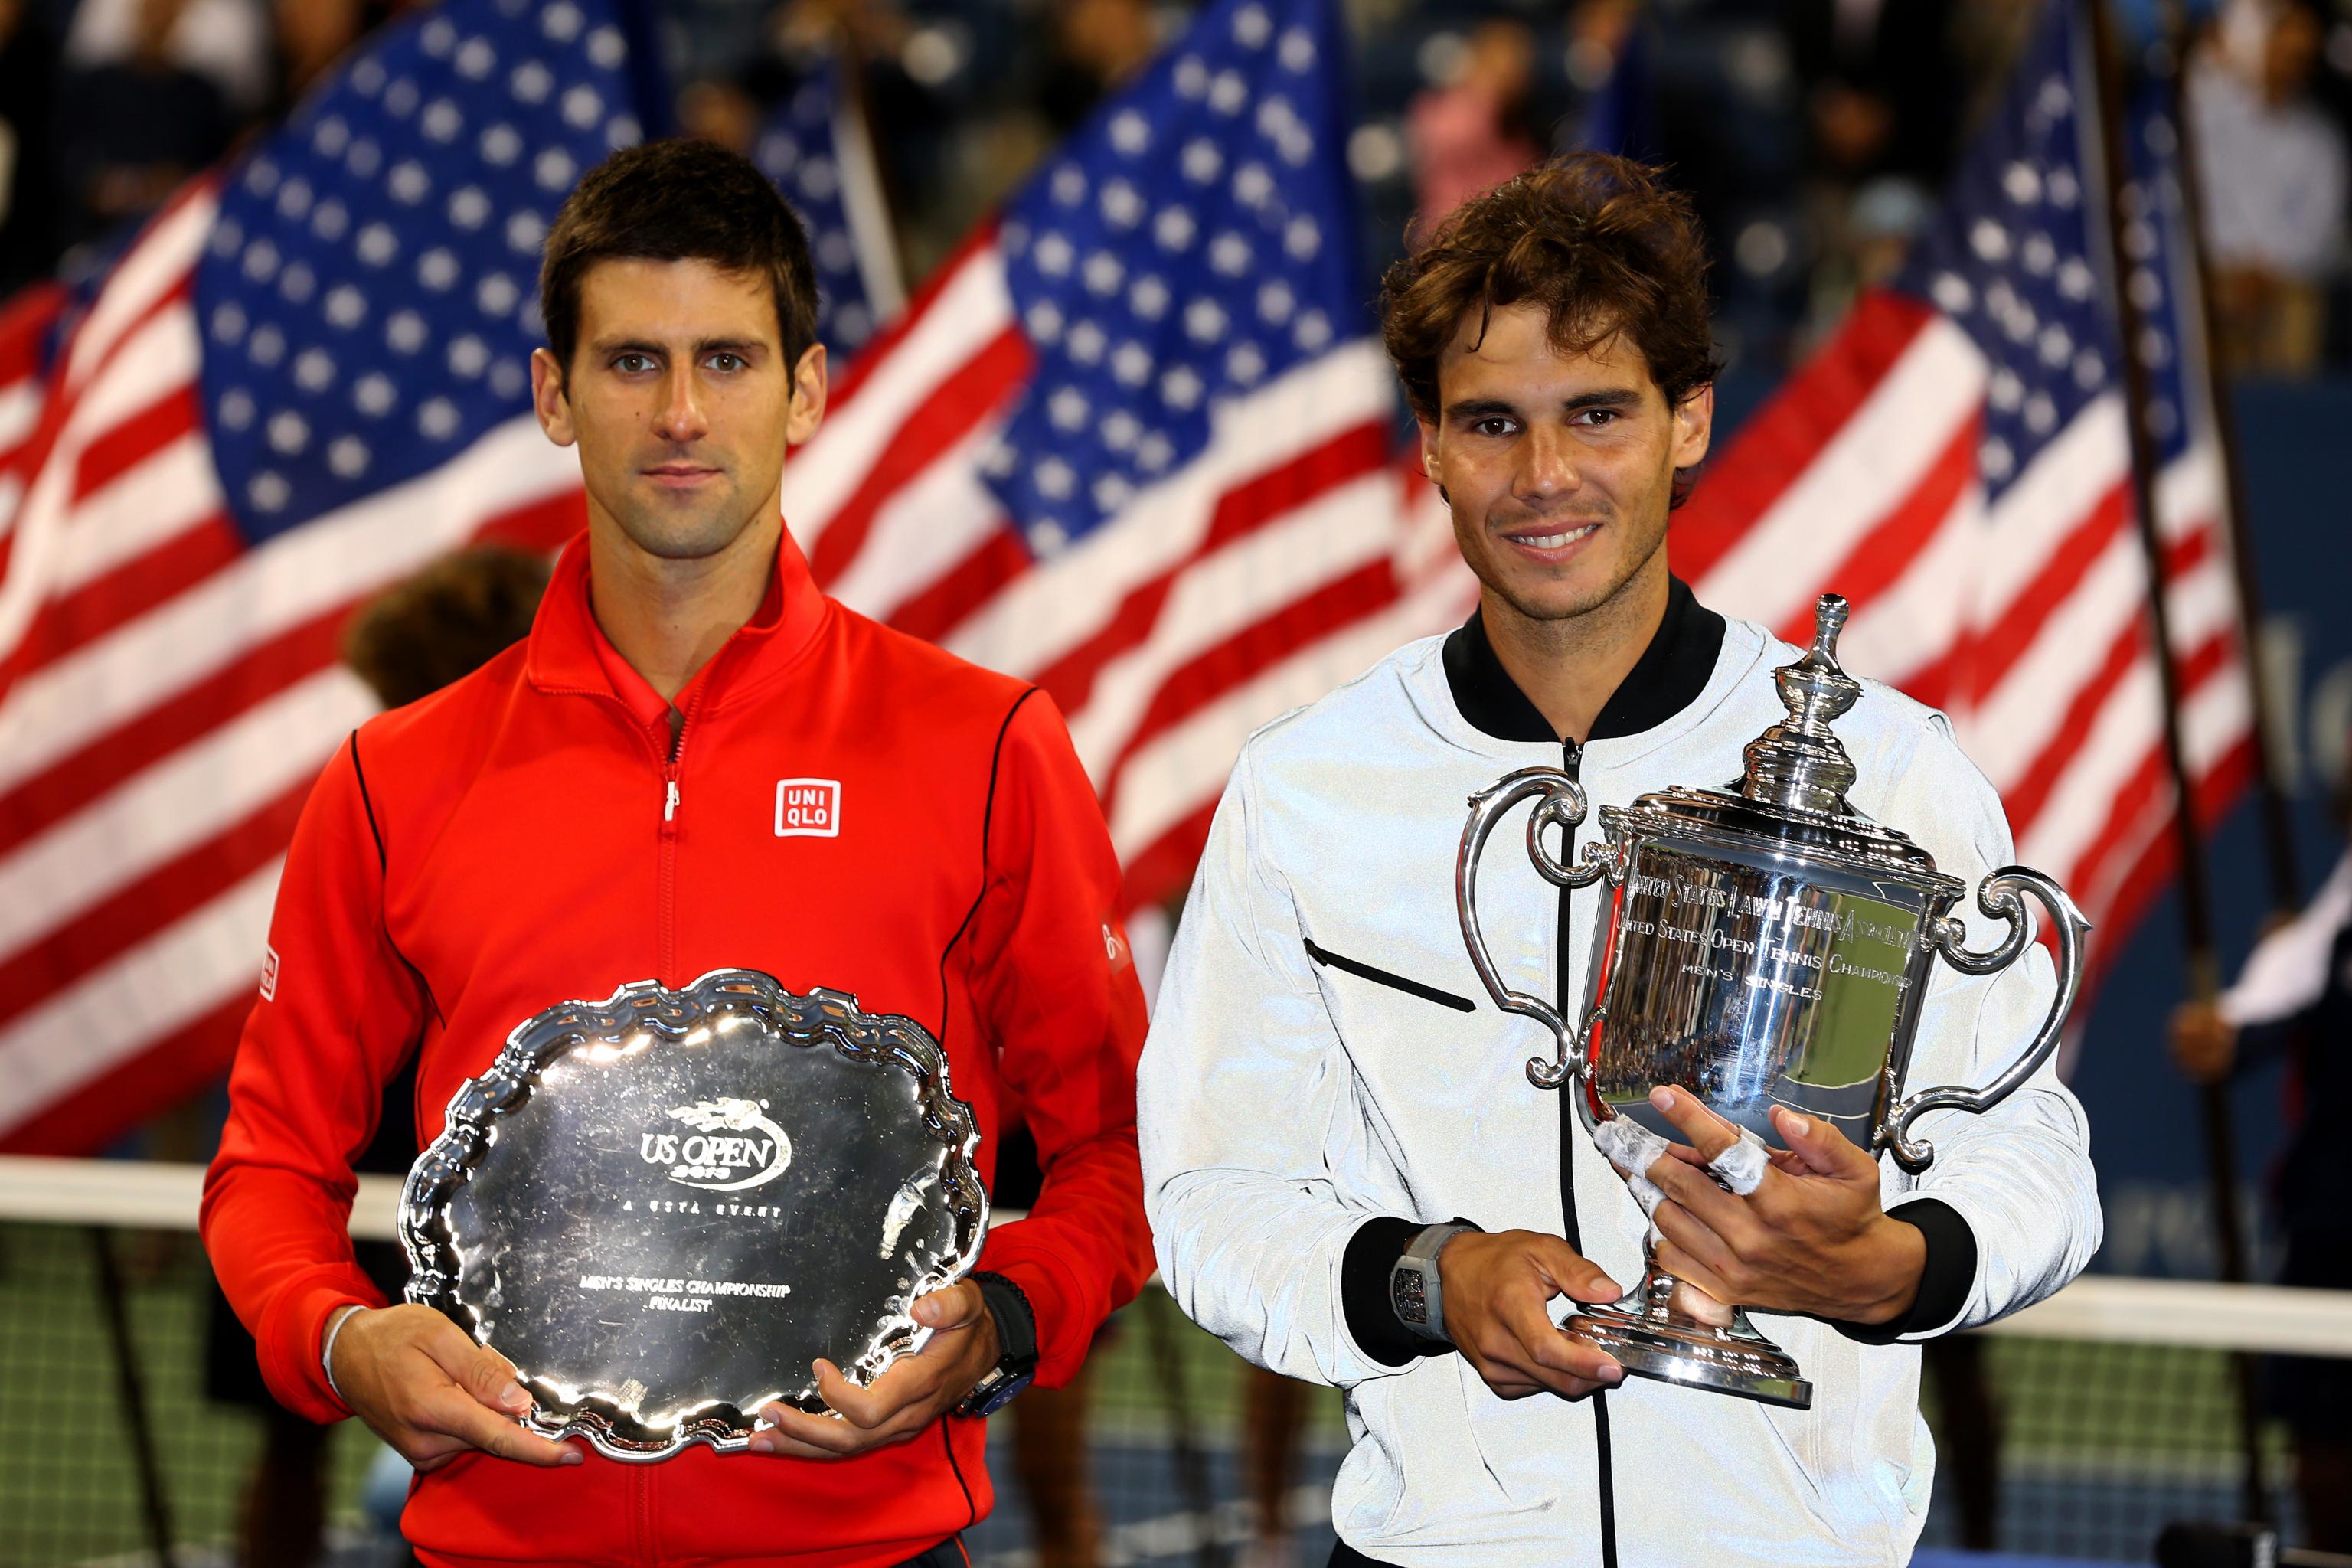 Who will be the Ultimate US Open Champion in this Draw ??? | Page 2 | Tennis